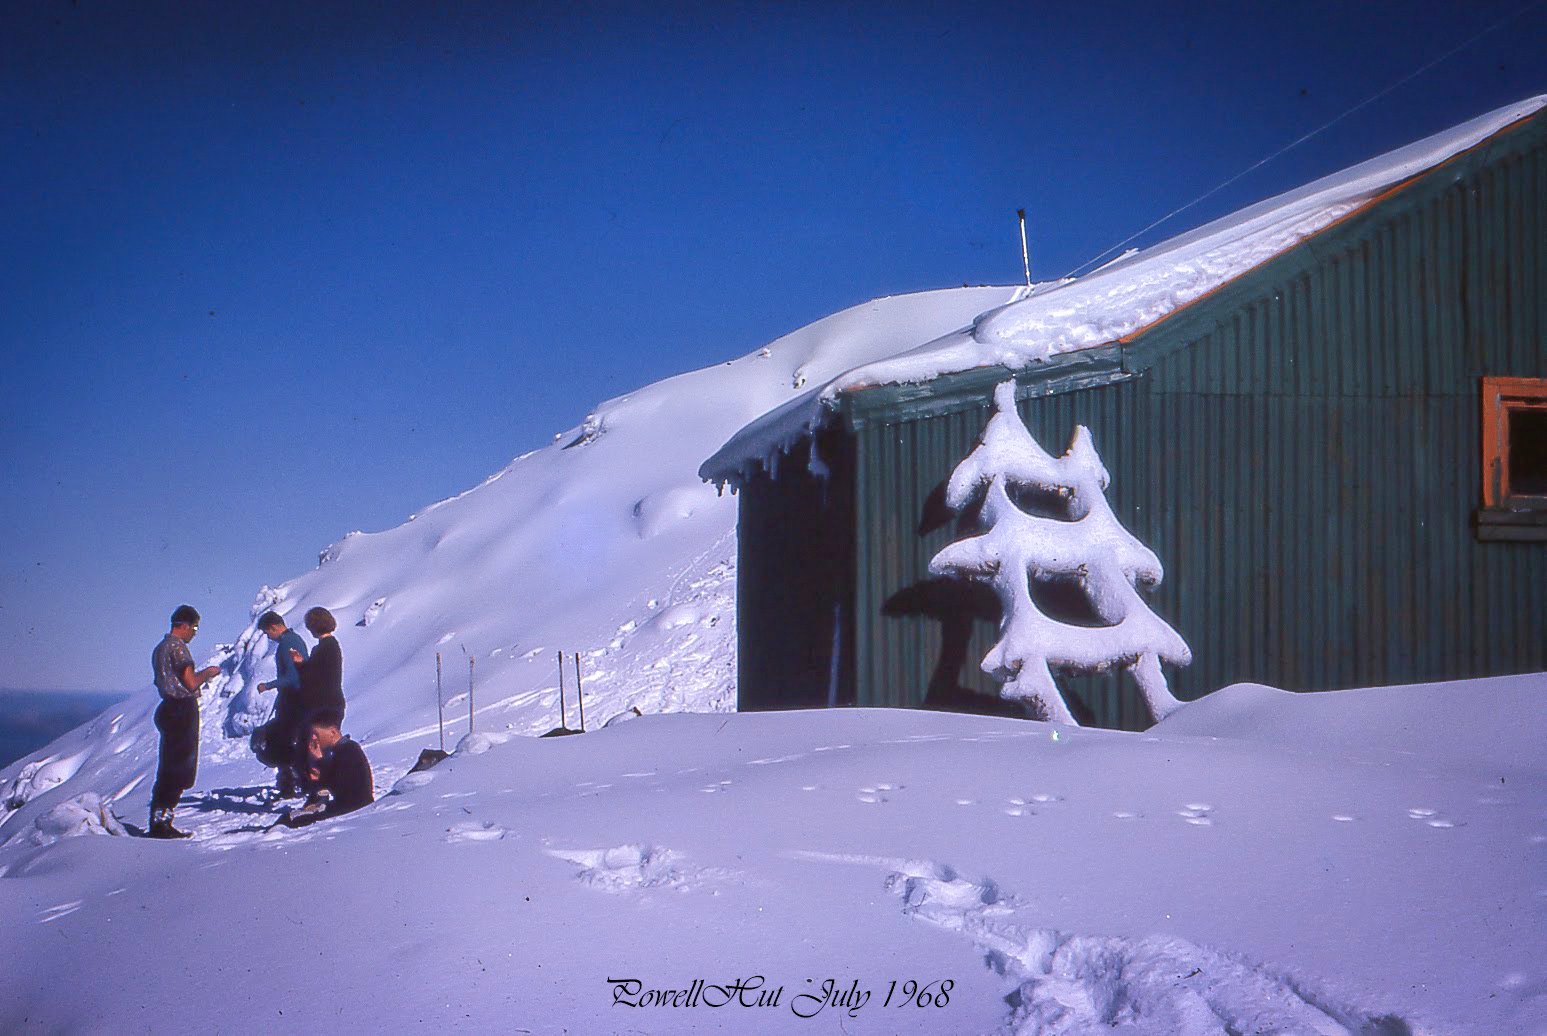 Photo of Powell Hut, Tararua Forest Park, in July 1968